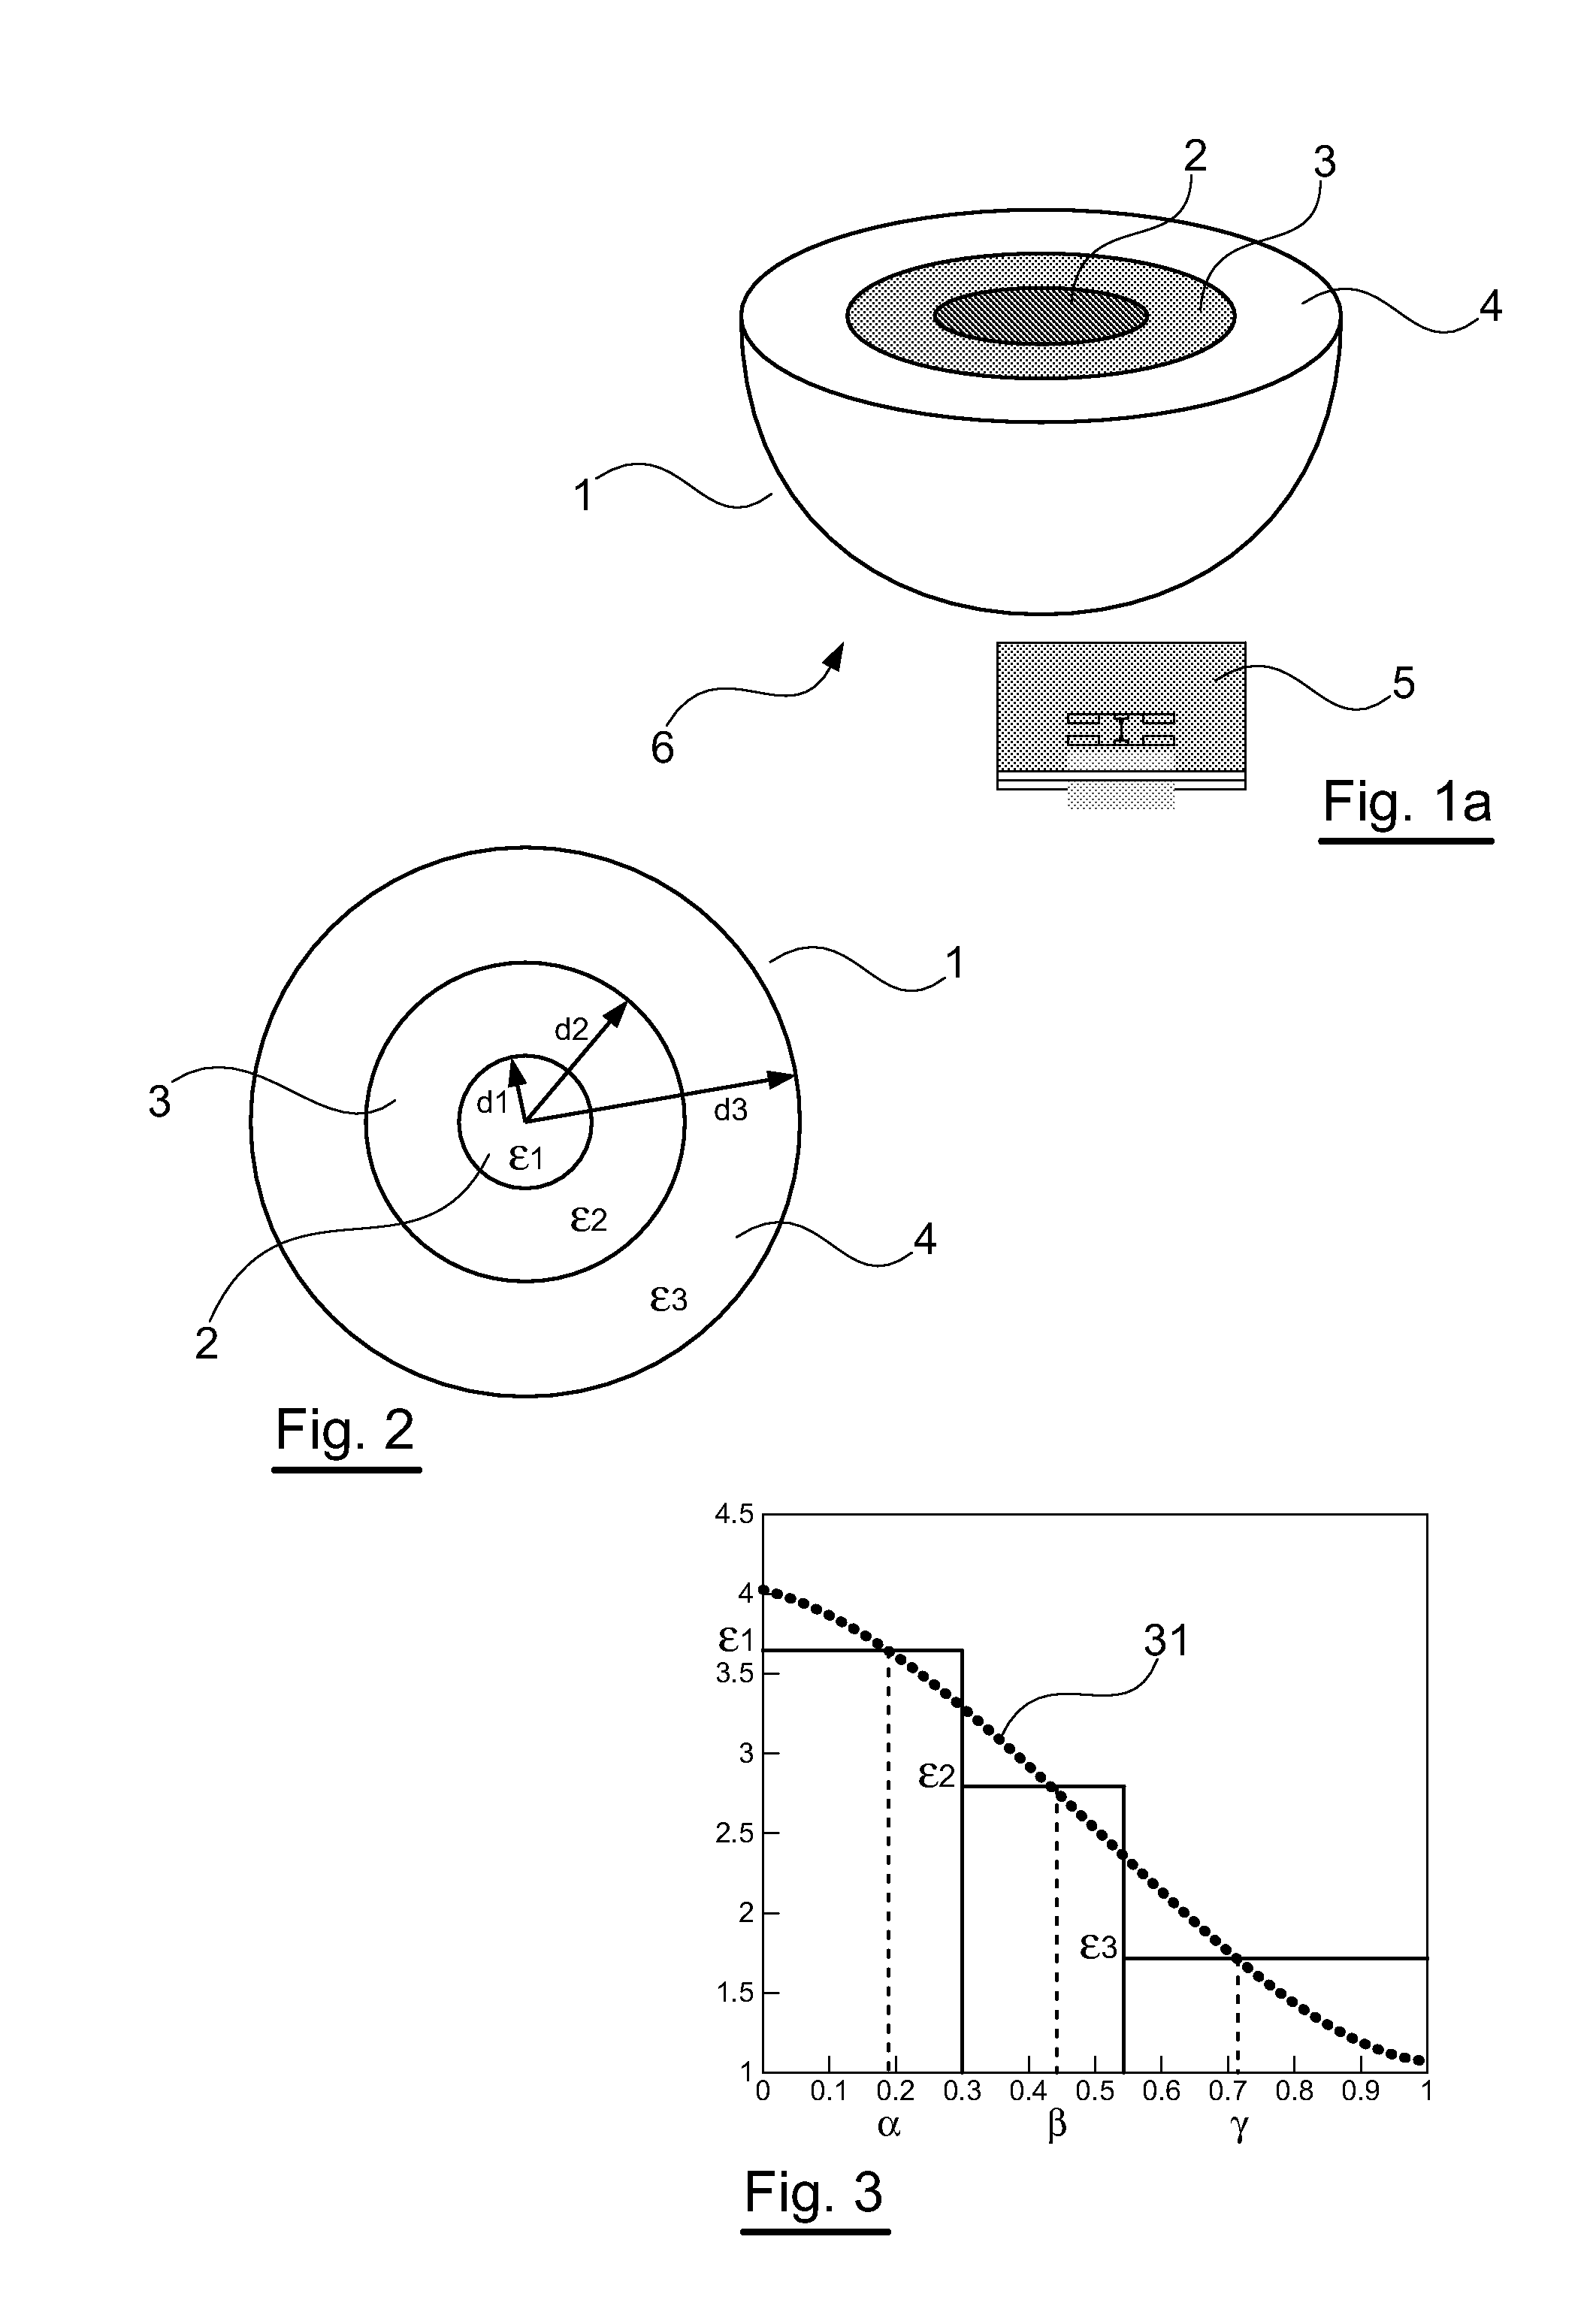 Inhomogeneous lens with maxwell's fish-eye type gradient index, antenna system and corresponding applications